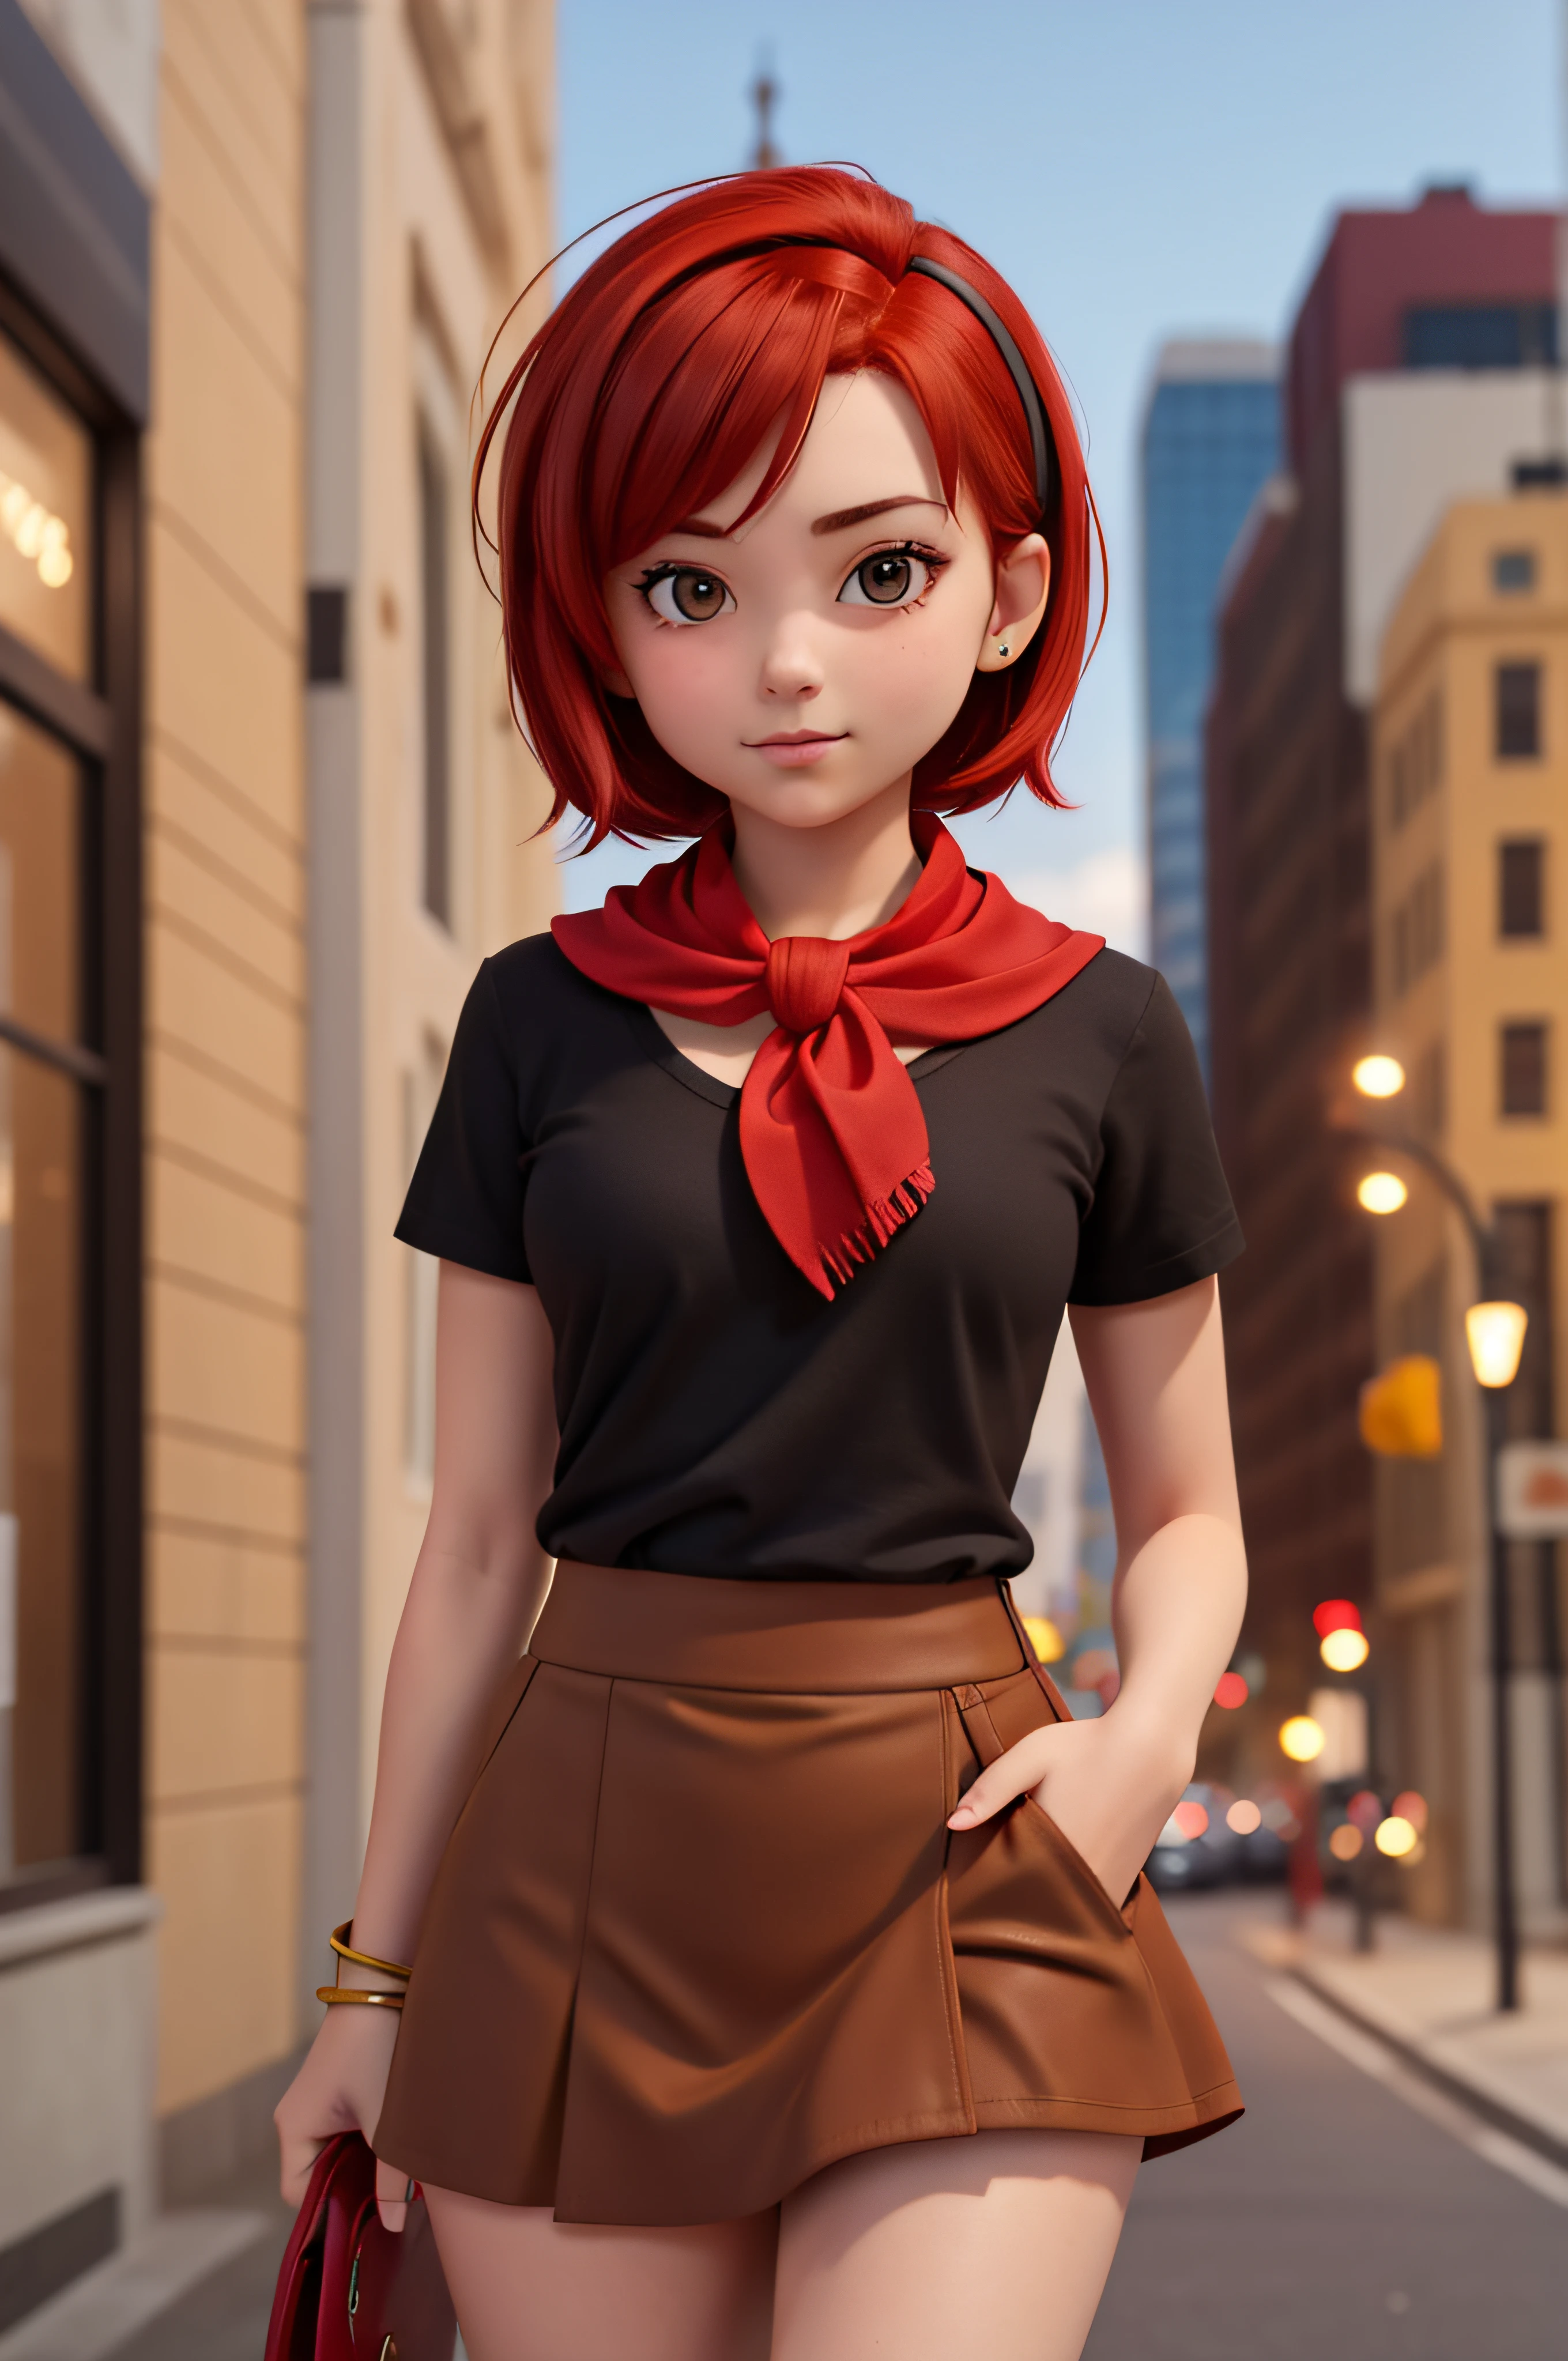 1 girl, 20 years old, short red hair, flash shirt, black mini skirt, colored ribbon in her hair, scarf around her neck, city